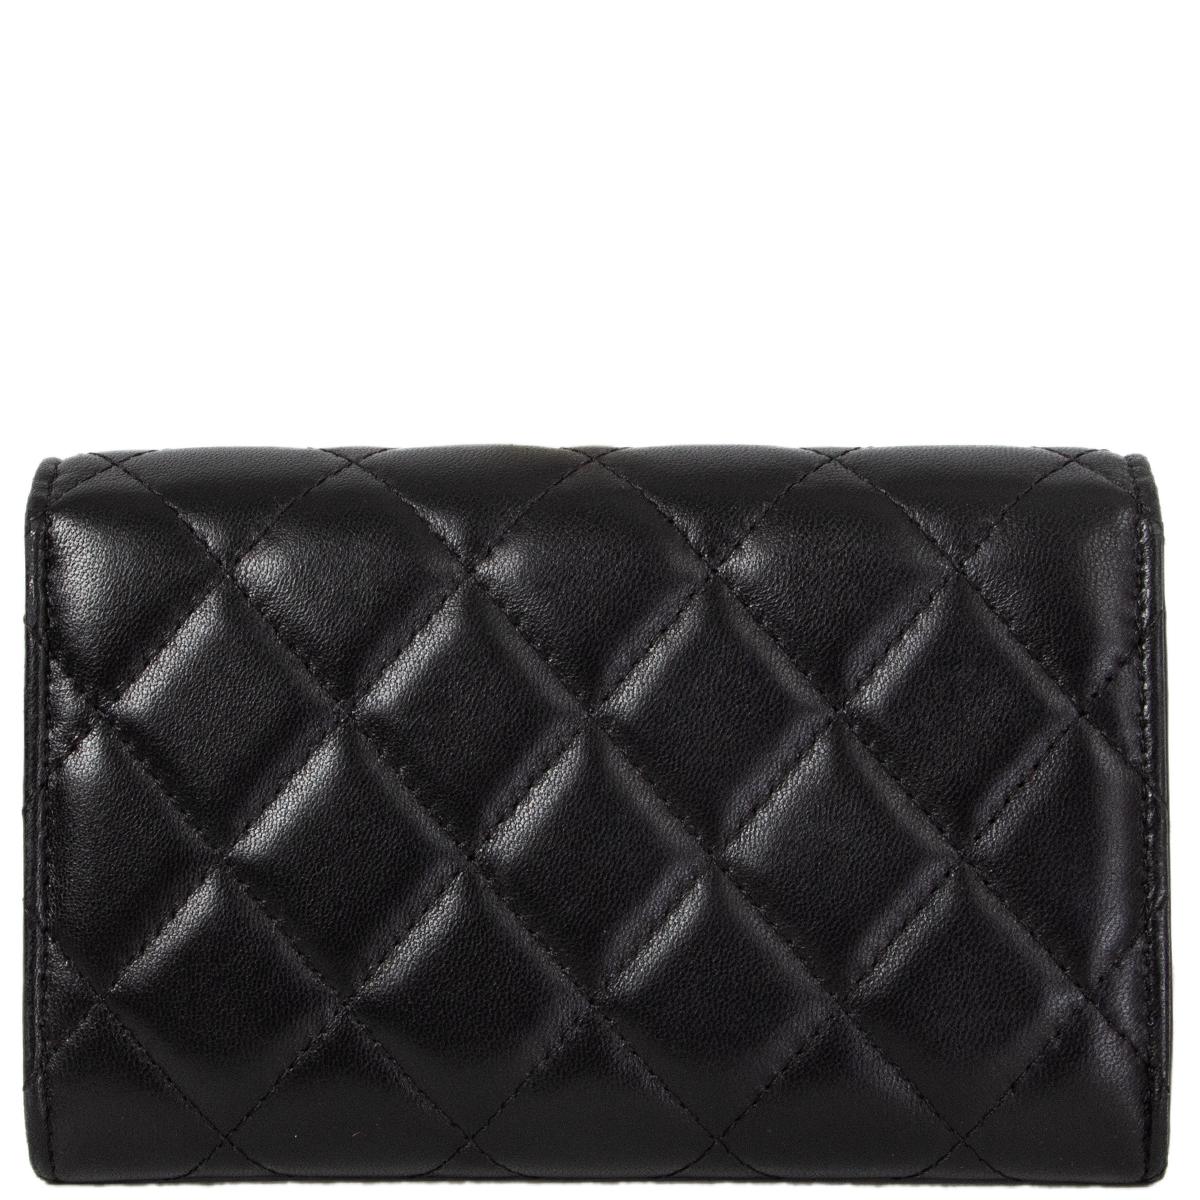 Black CHANEL black quilted leather EGYPT CC Wallet